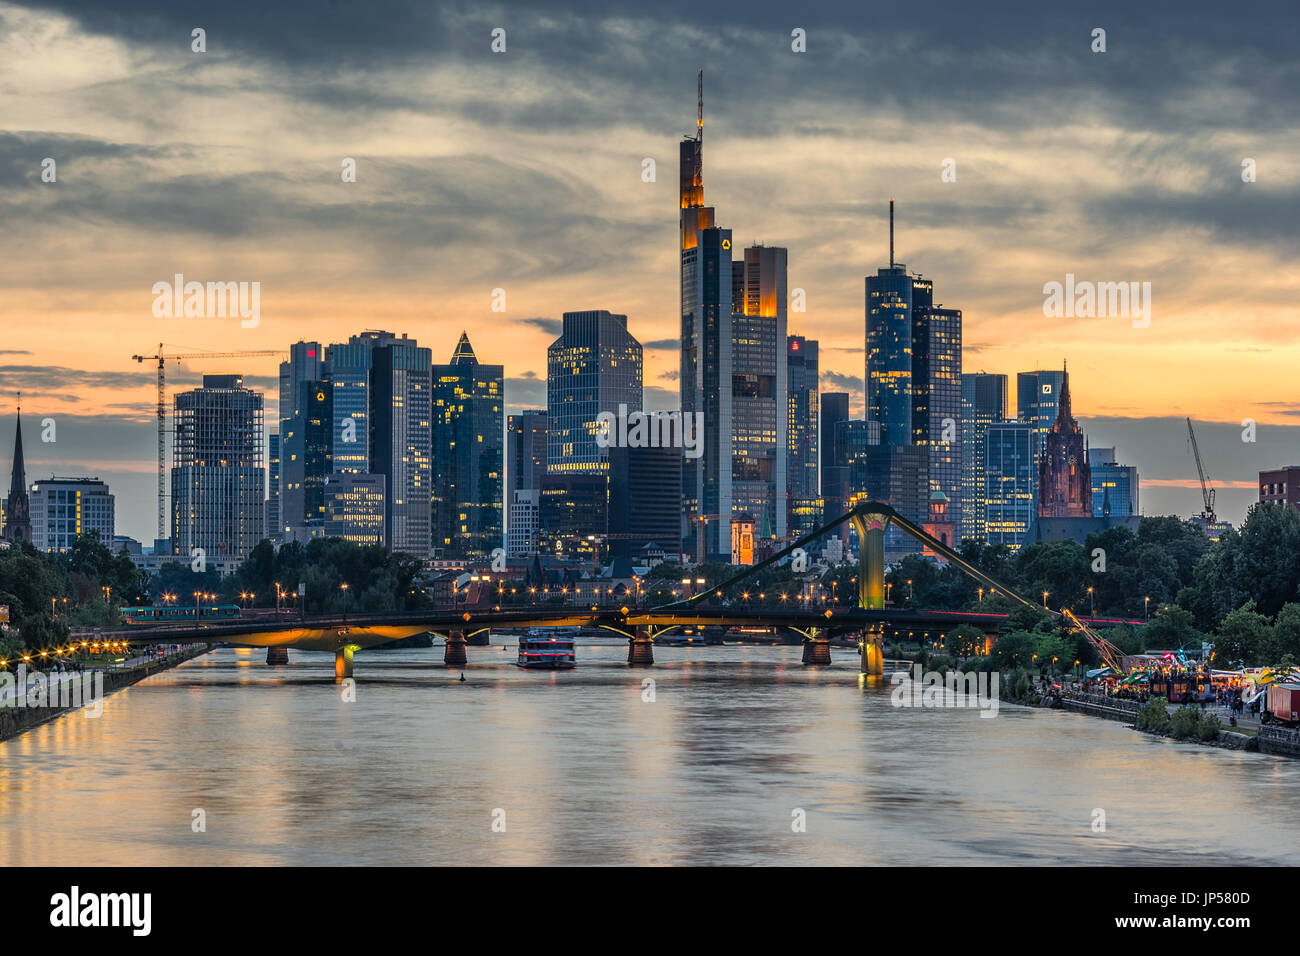 Looking across the Main river to the CBD in Frankfurt Am Main in Germany Stock Photo